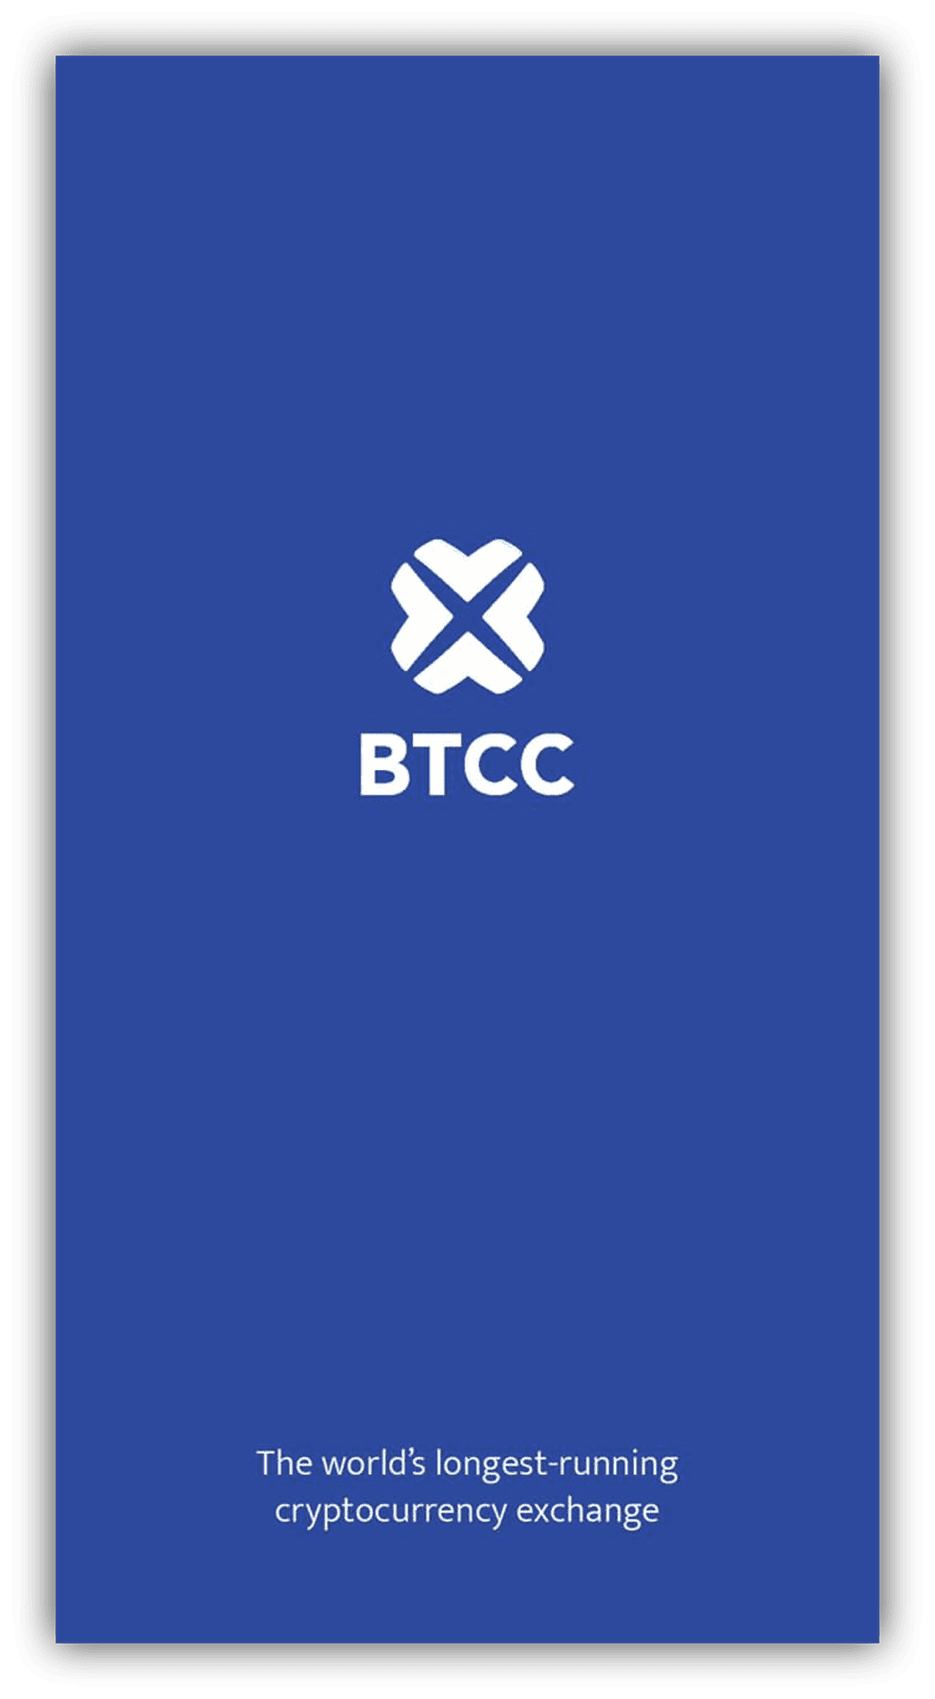 FTX US to BTCC 1 - How to transfer crypto from FTX US to BTCC